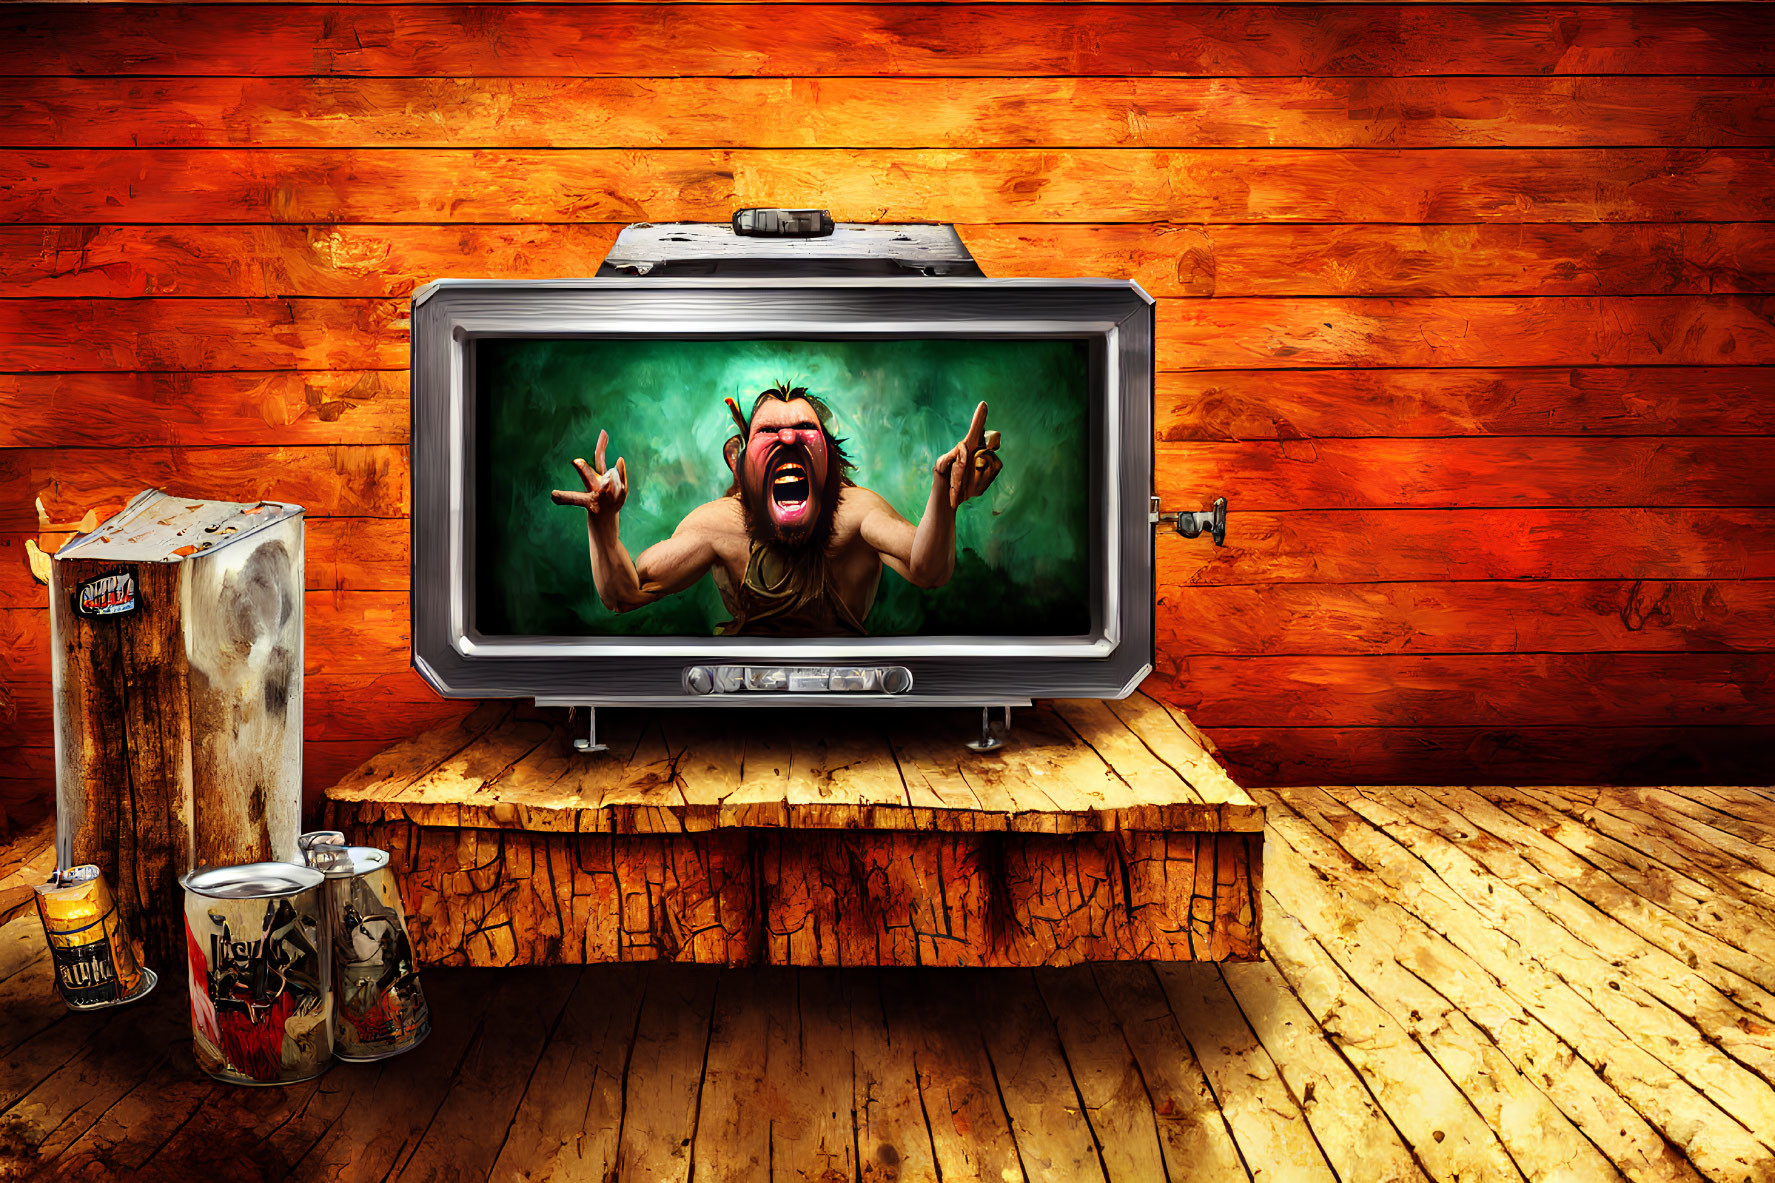 Vintage TV with animated character screaming on wooden table, surrounded by paint cans and boombox against wooden plank